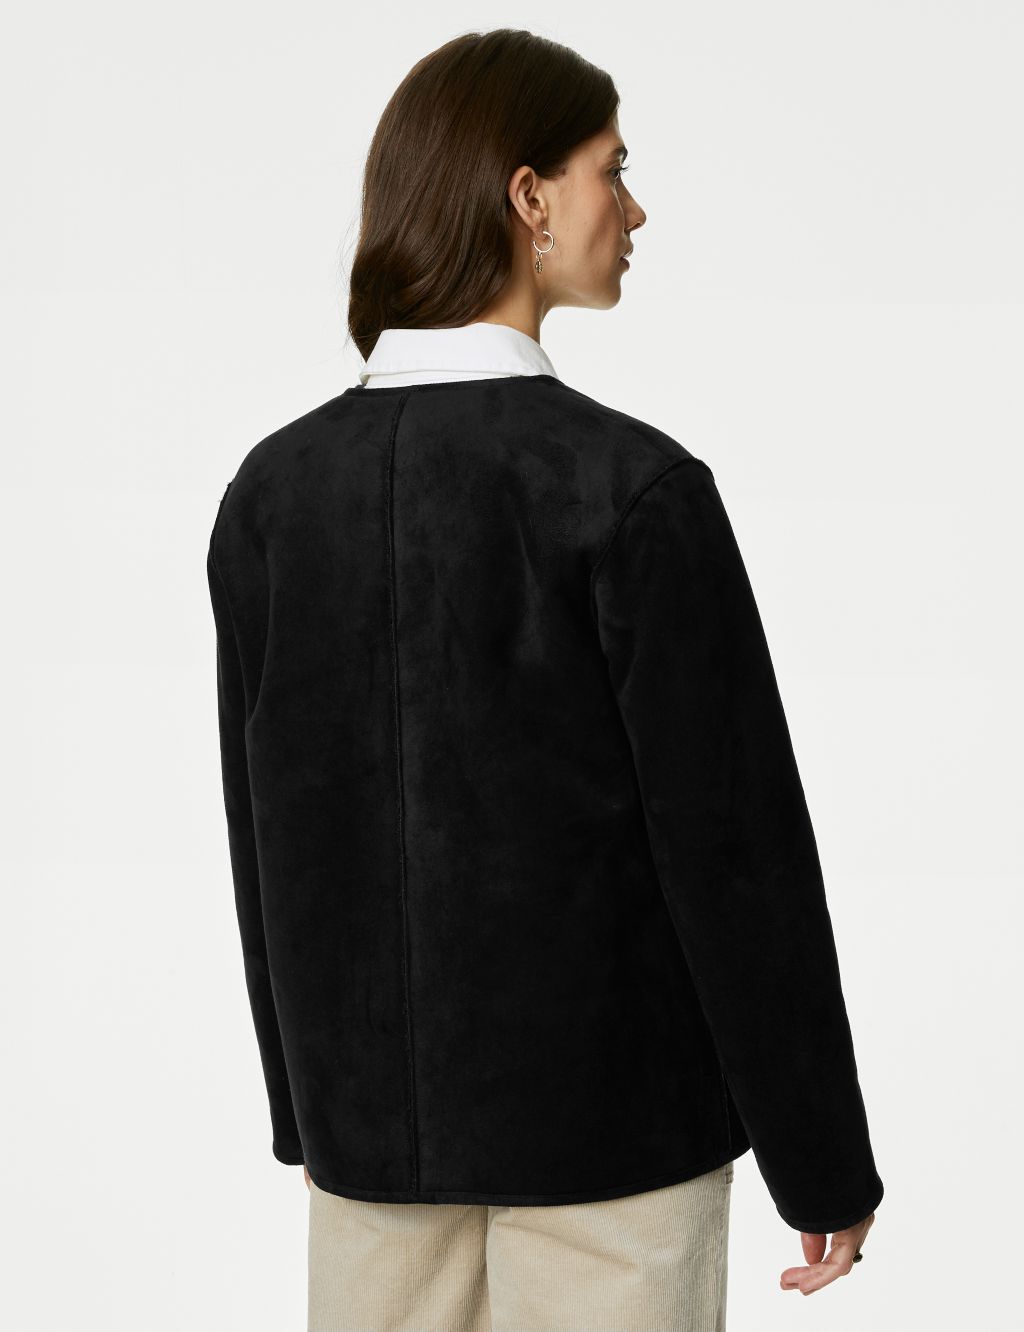 Faux Shearling Textured Reversible Jacket image 5